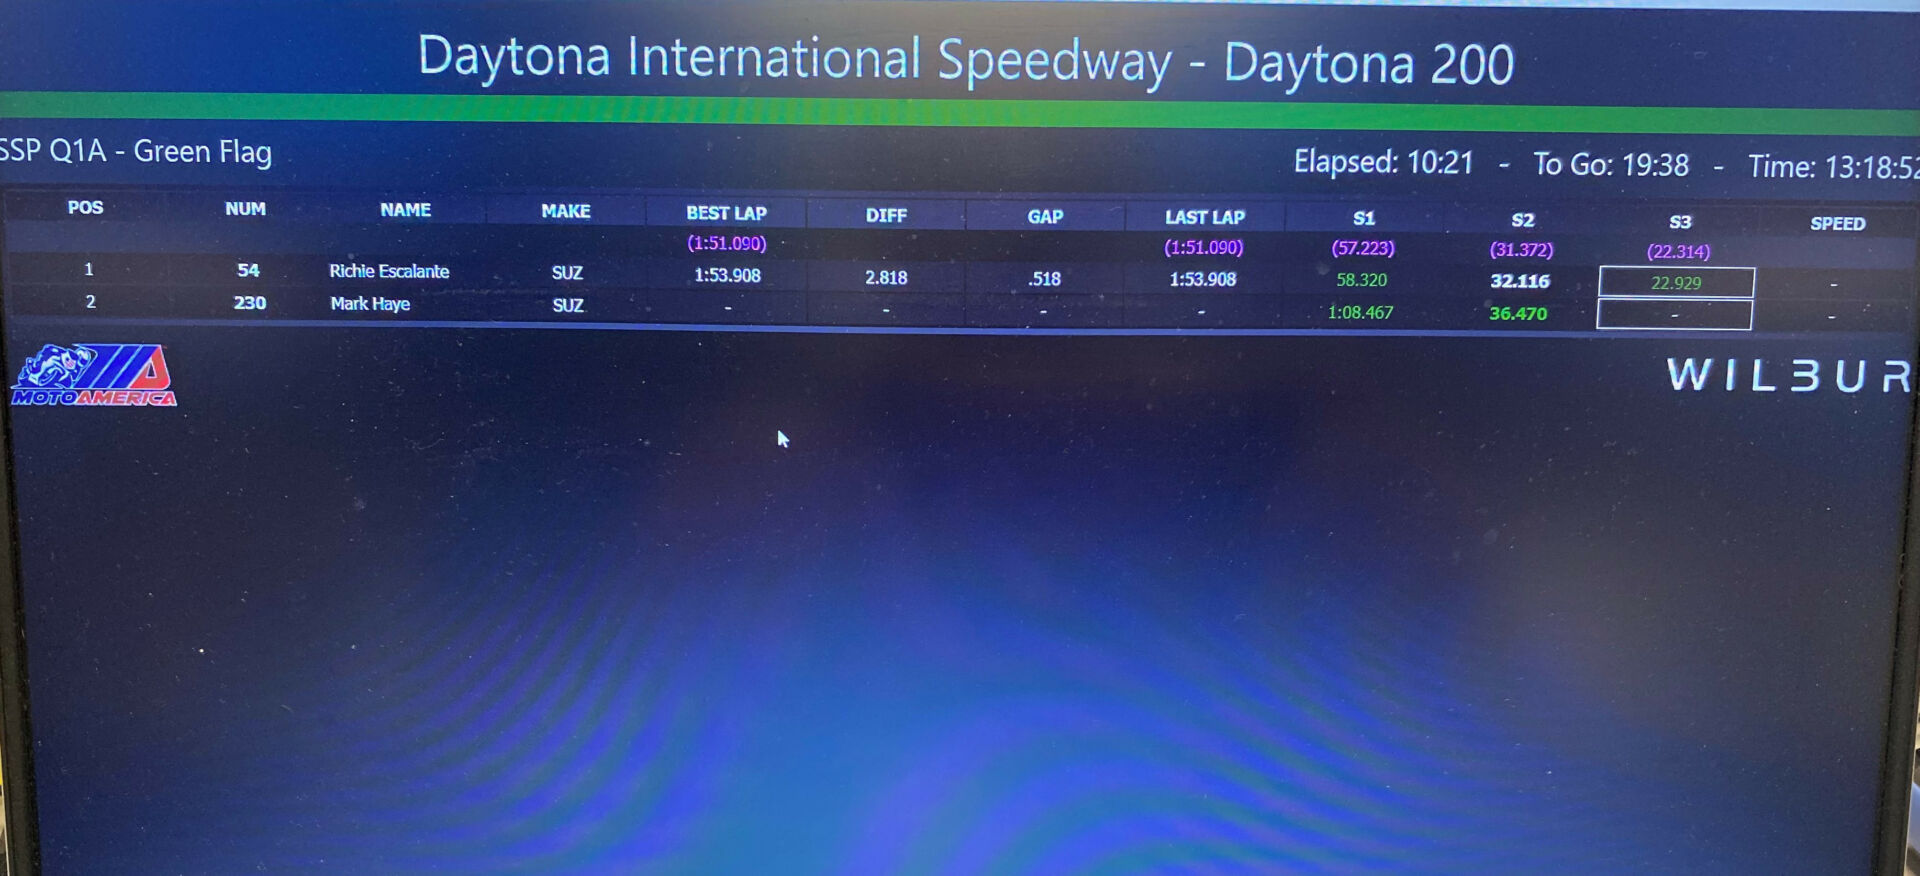 The live timing page on MotoAmerica.com, as seen during Supersport Group A Qualifying One Thursday afternoon at Daytona International Speedway. Photo by David Swarts.